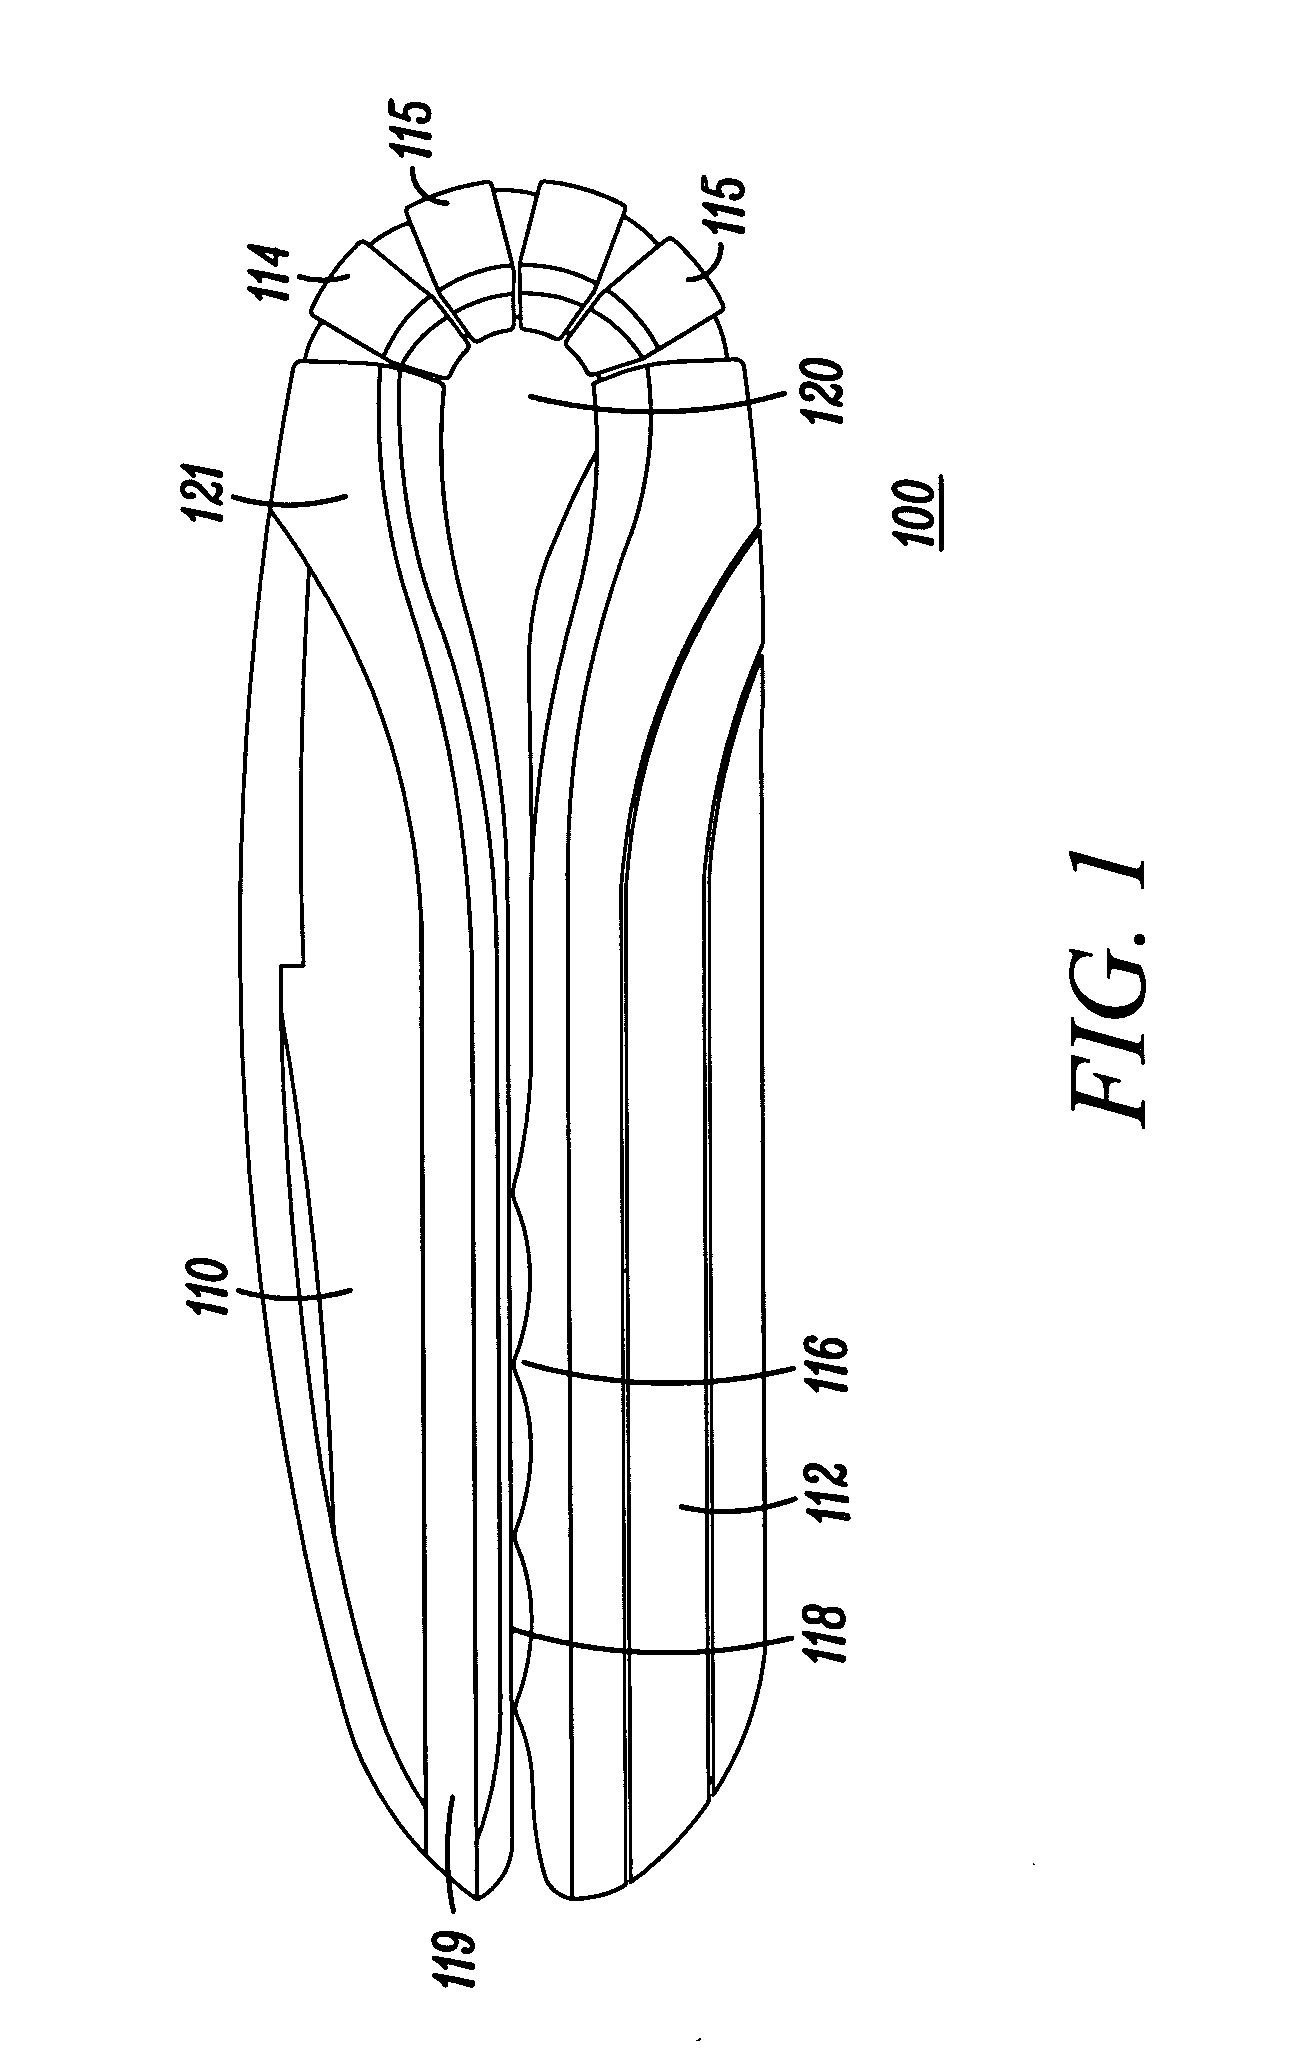 Flexible hinge for portable electronic device